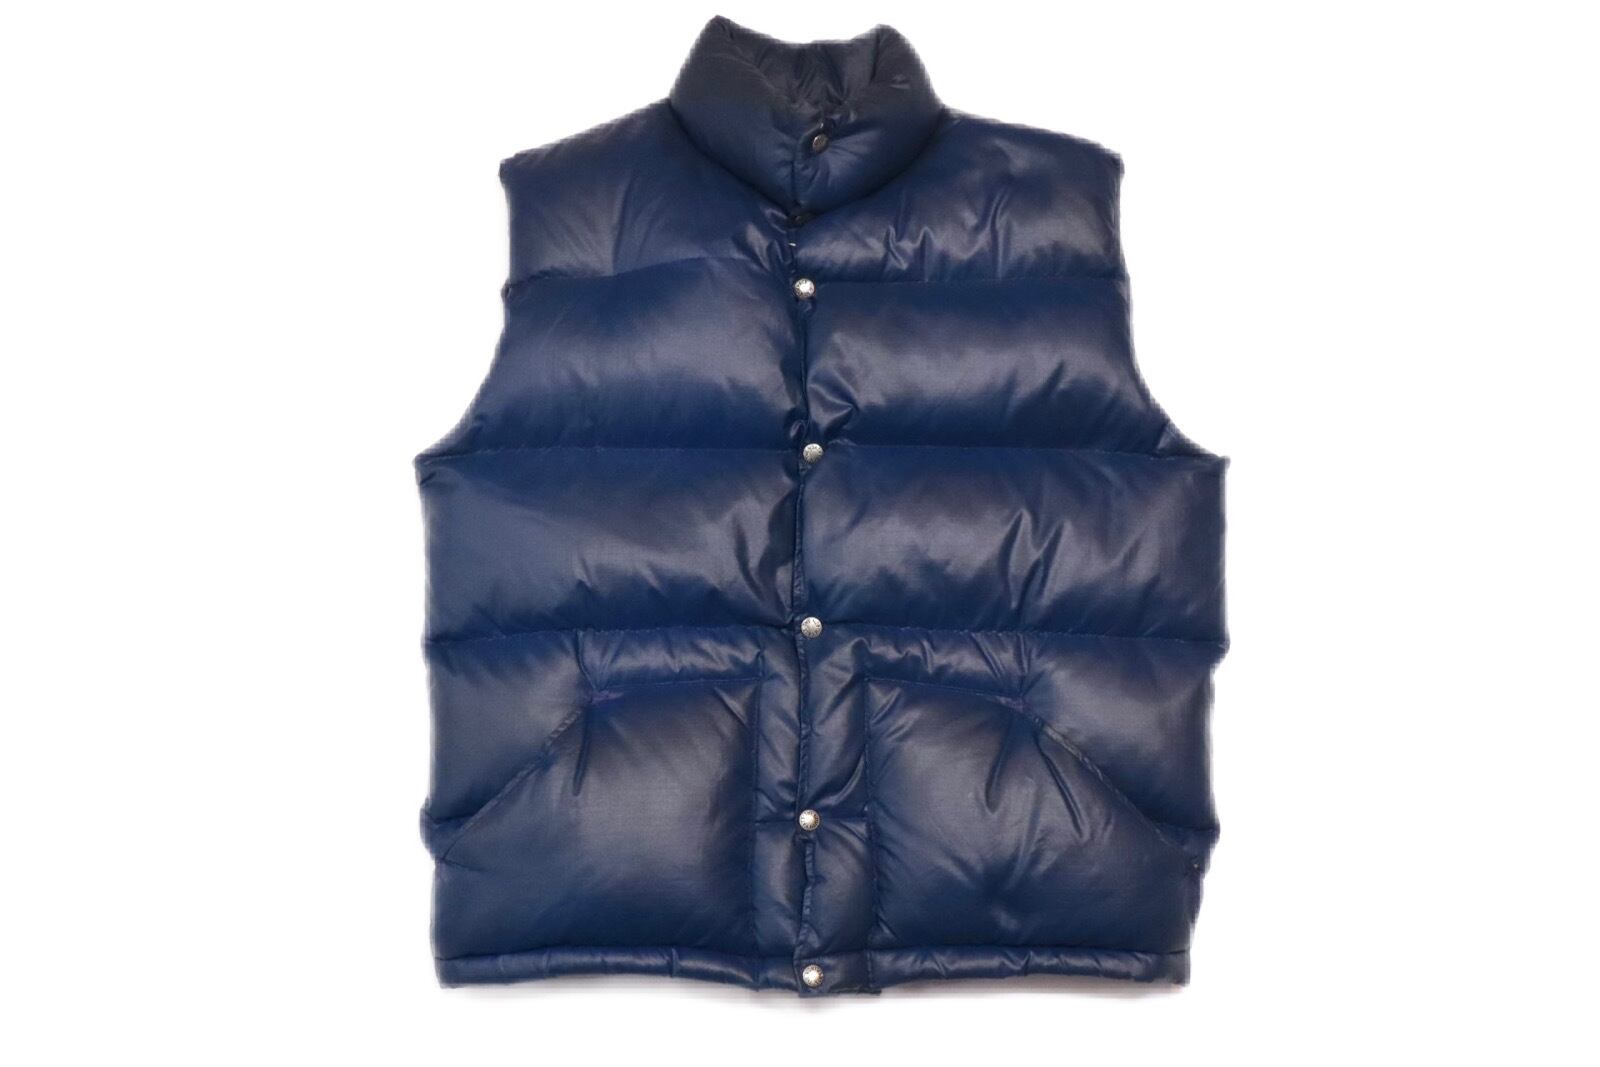 USED 70s THE NORTH FACE "Shierra down vest" -X-Large 01700